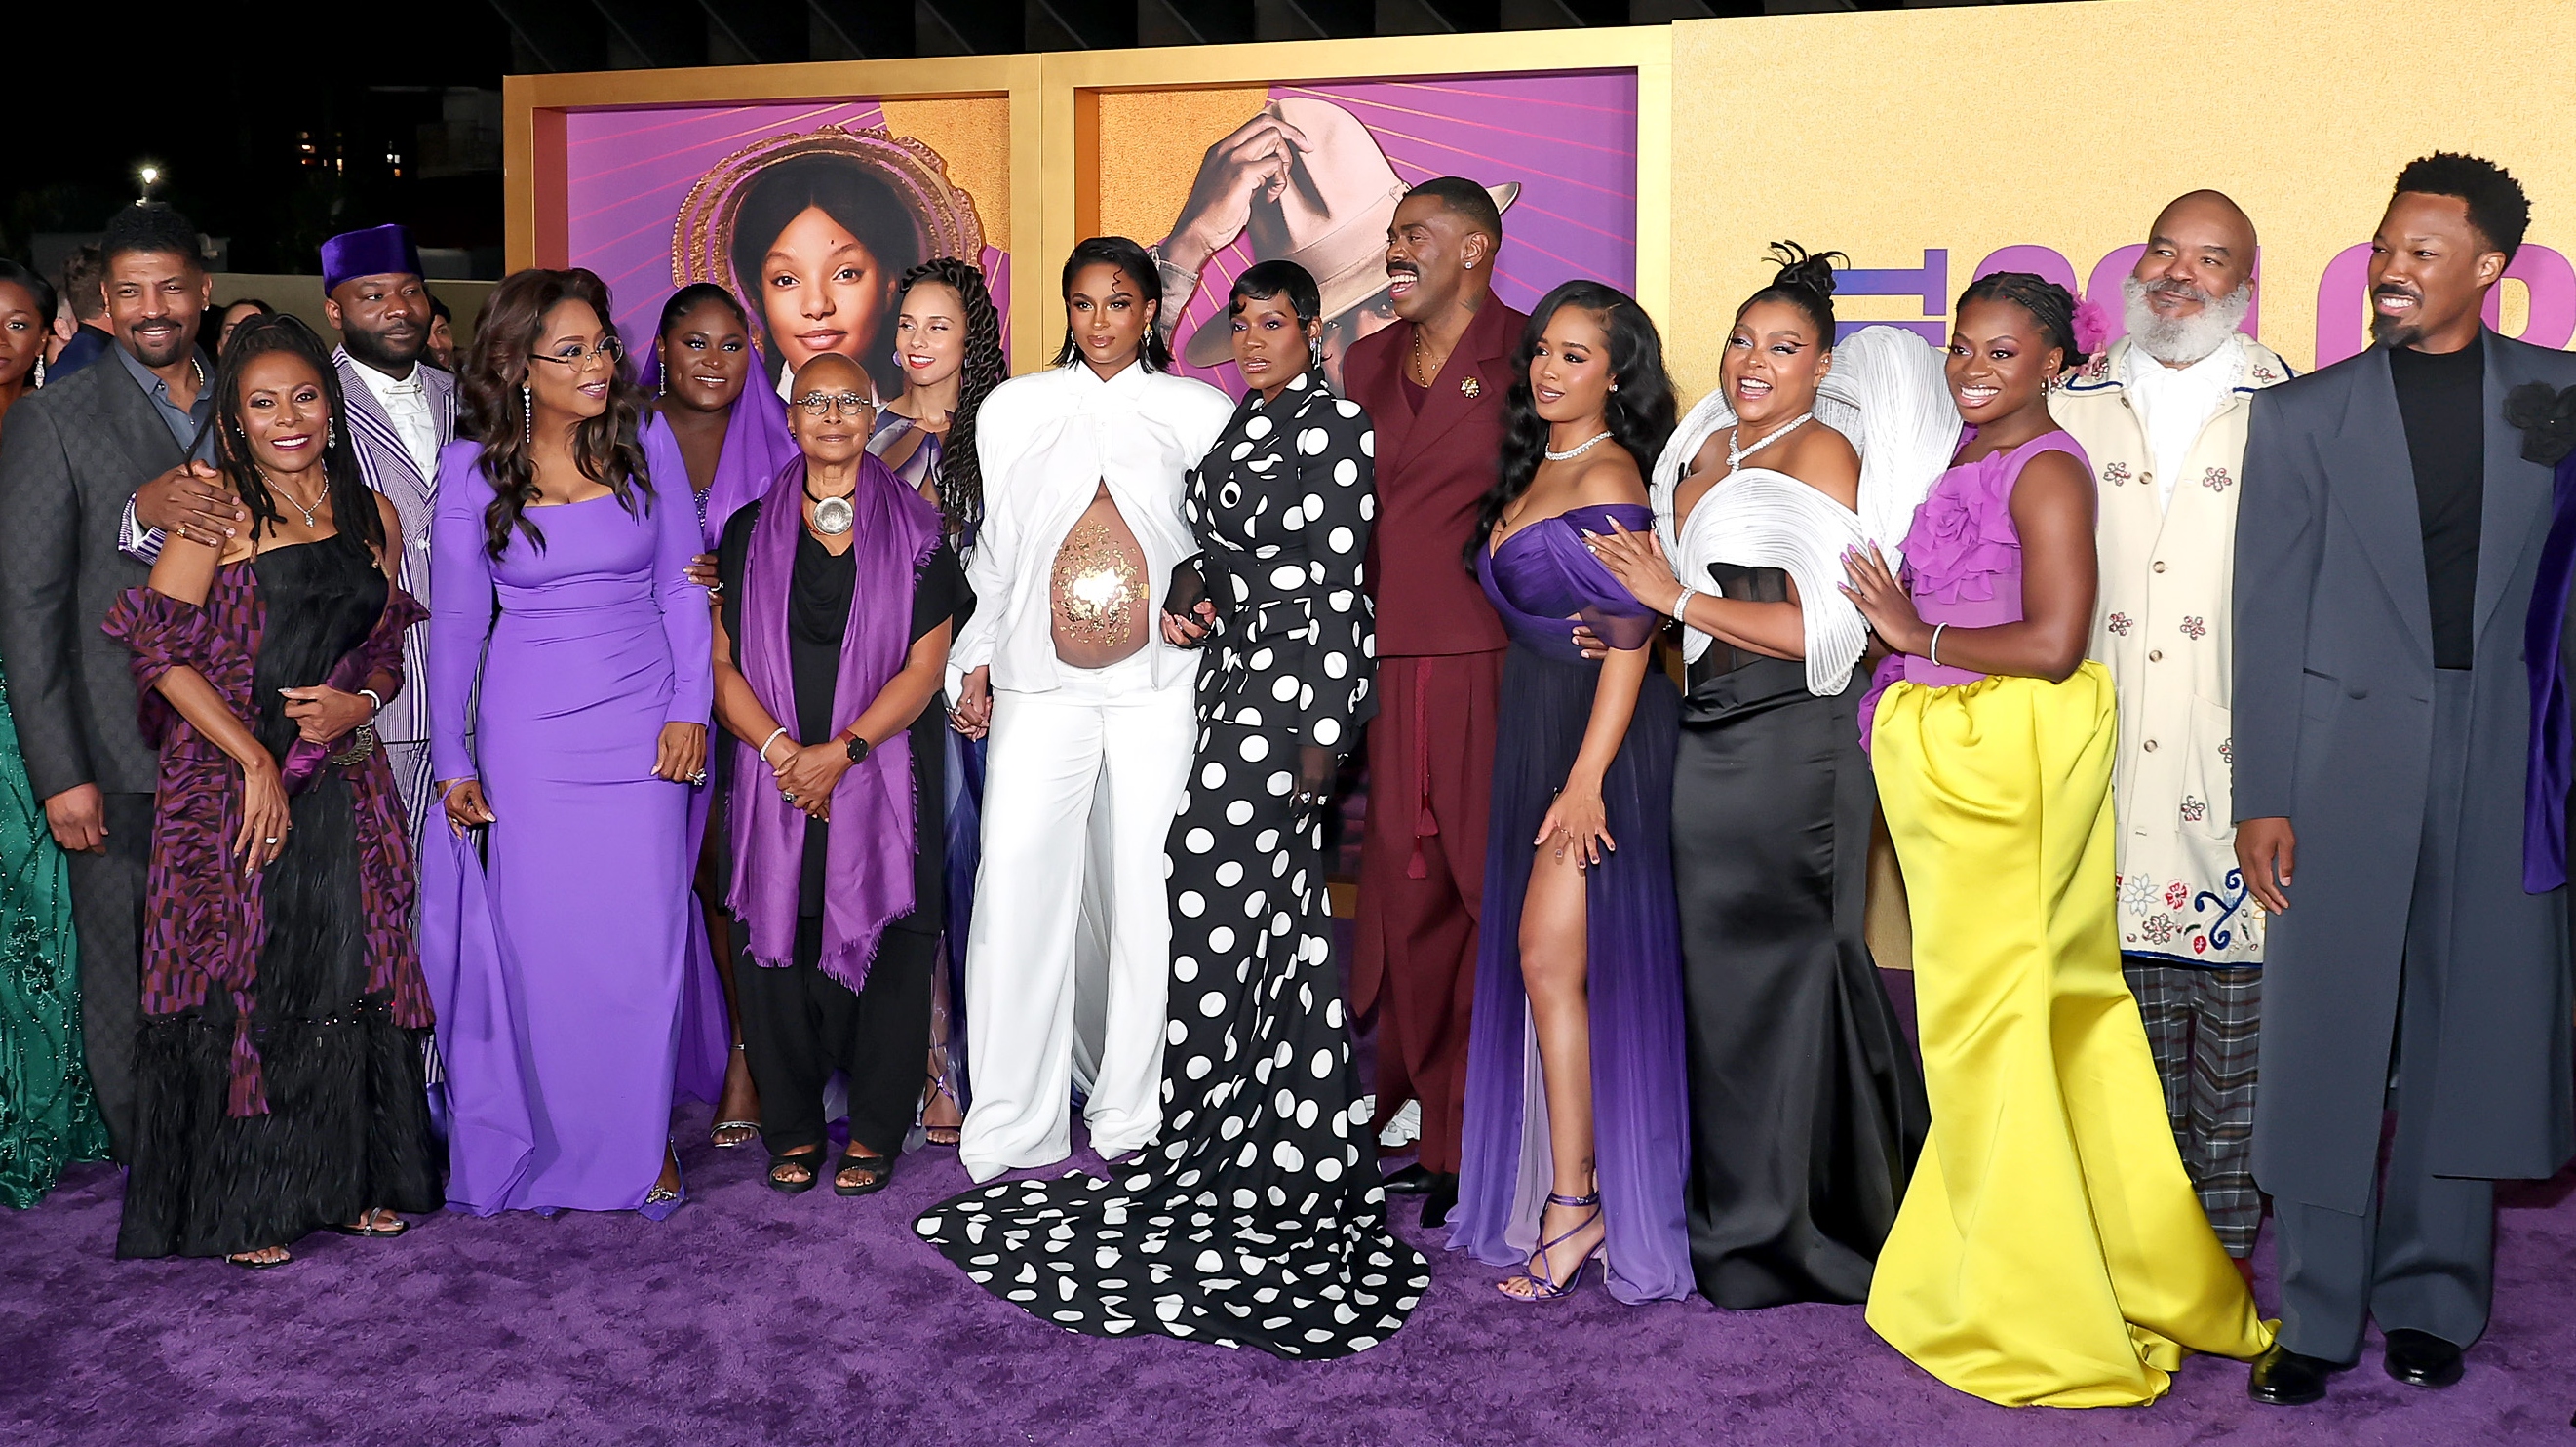 Red carpet recap: Oprah talks weight loss as purple reigns at ‘The Color Purple’ premiere